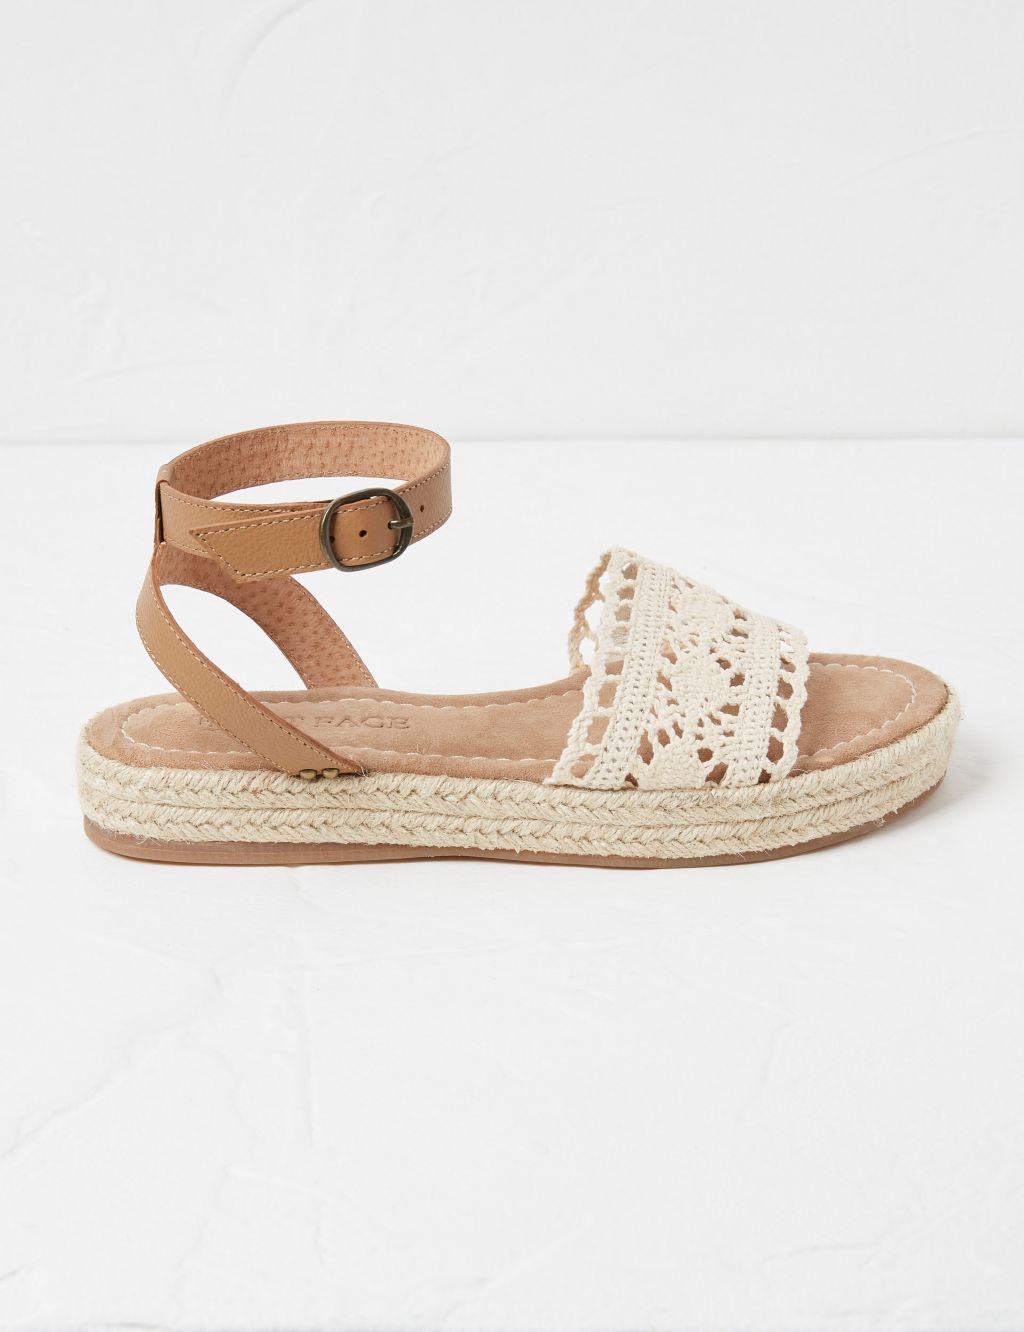 Leather Ankle Strap Flat Espadrilles image 1